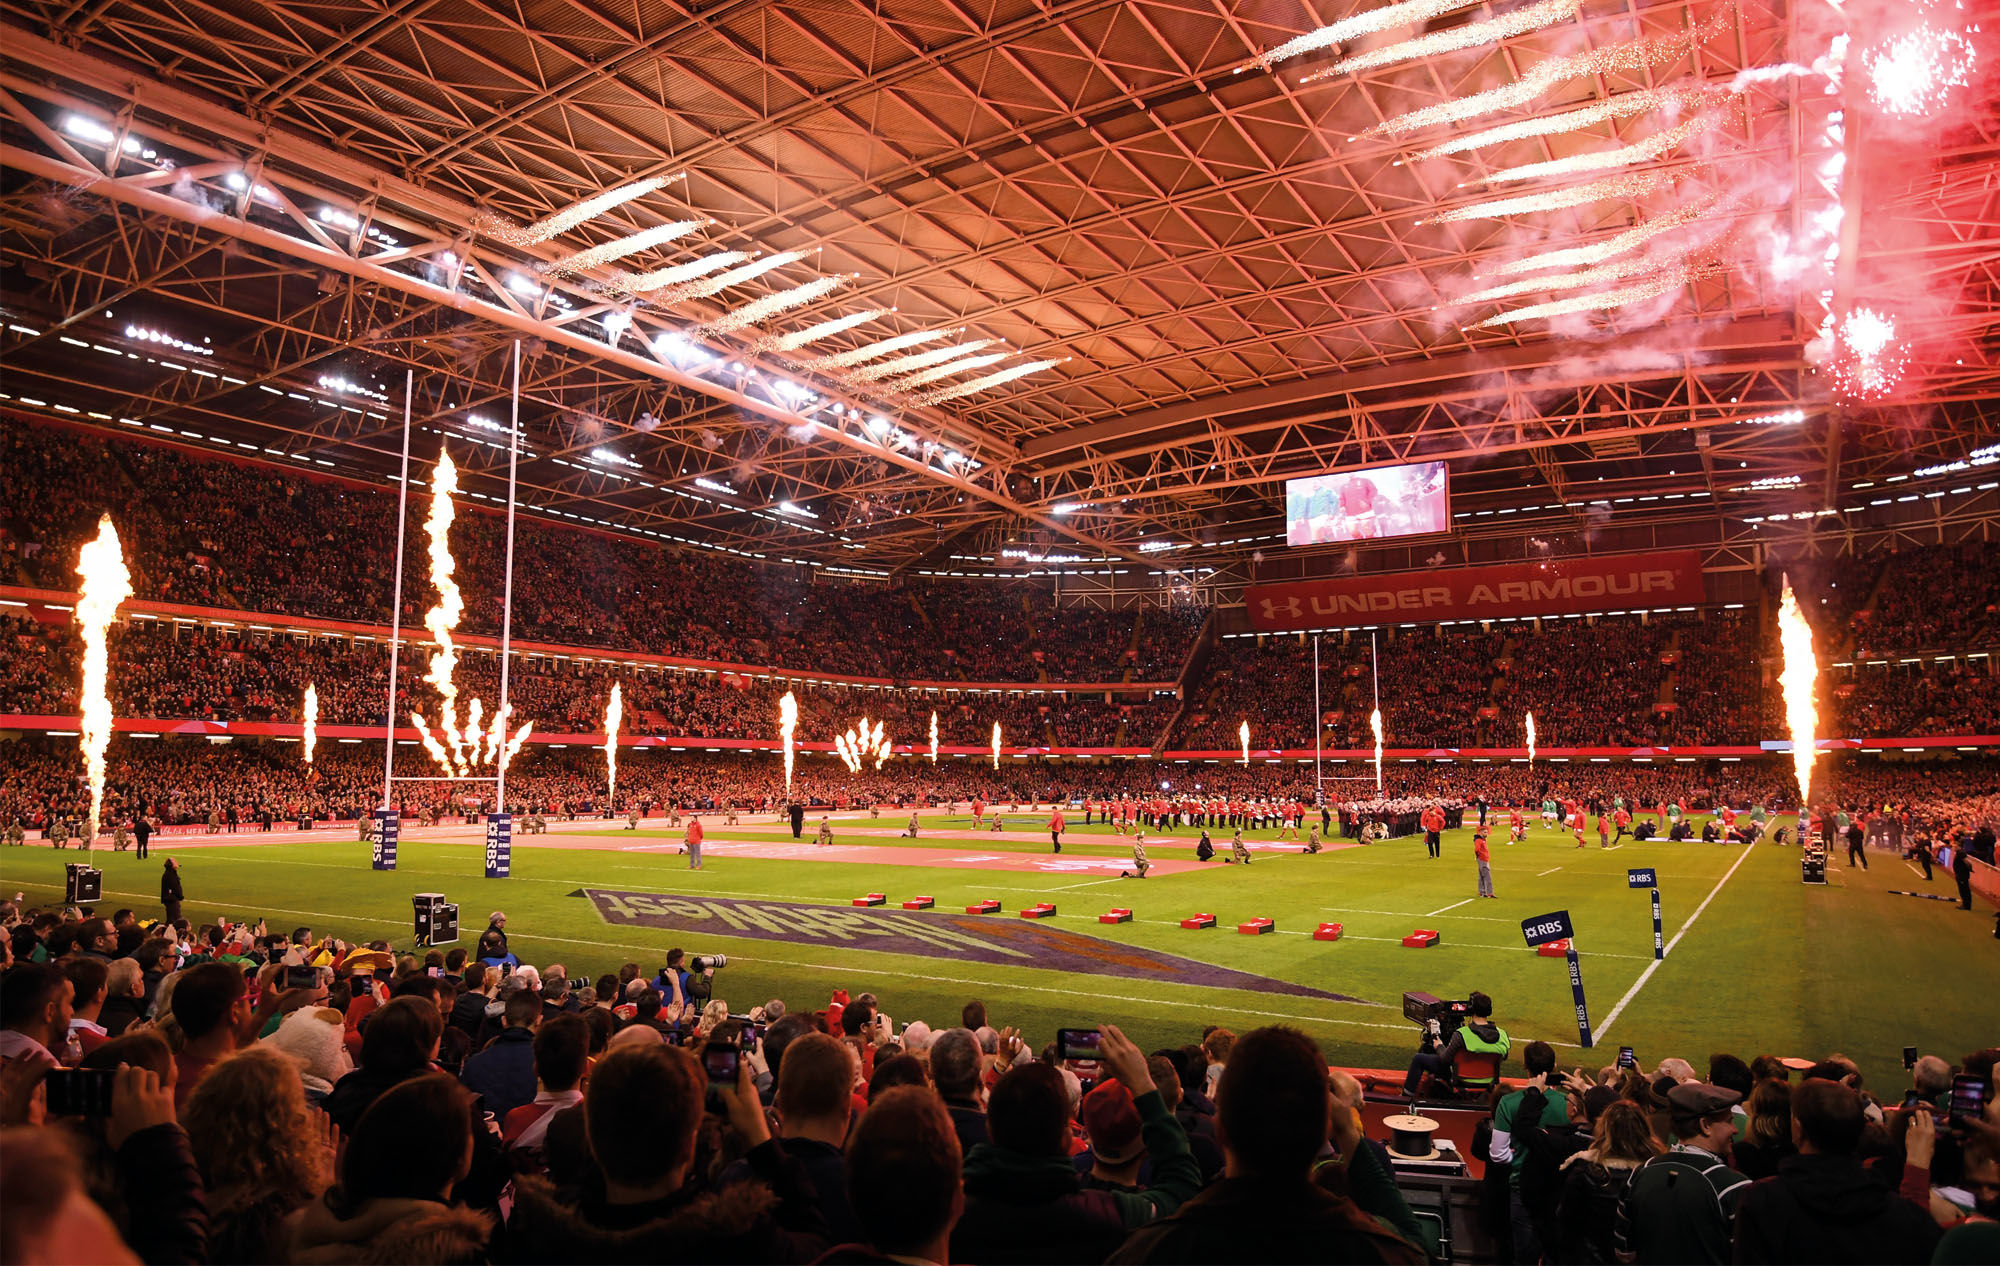 Wales v Irealand - RBS Six Nations Rugby Championship at Cardiff's Principality Stadium, one of the world's best rugby stadiums